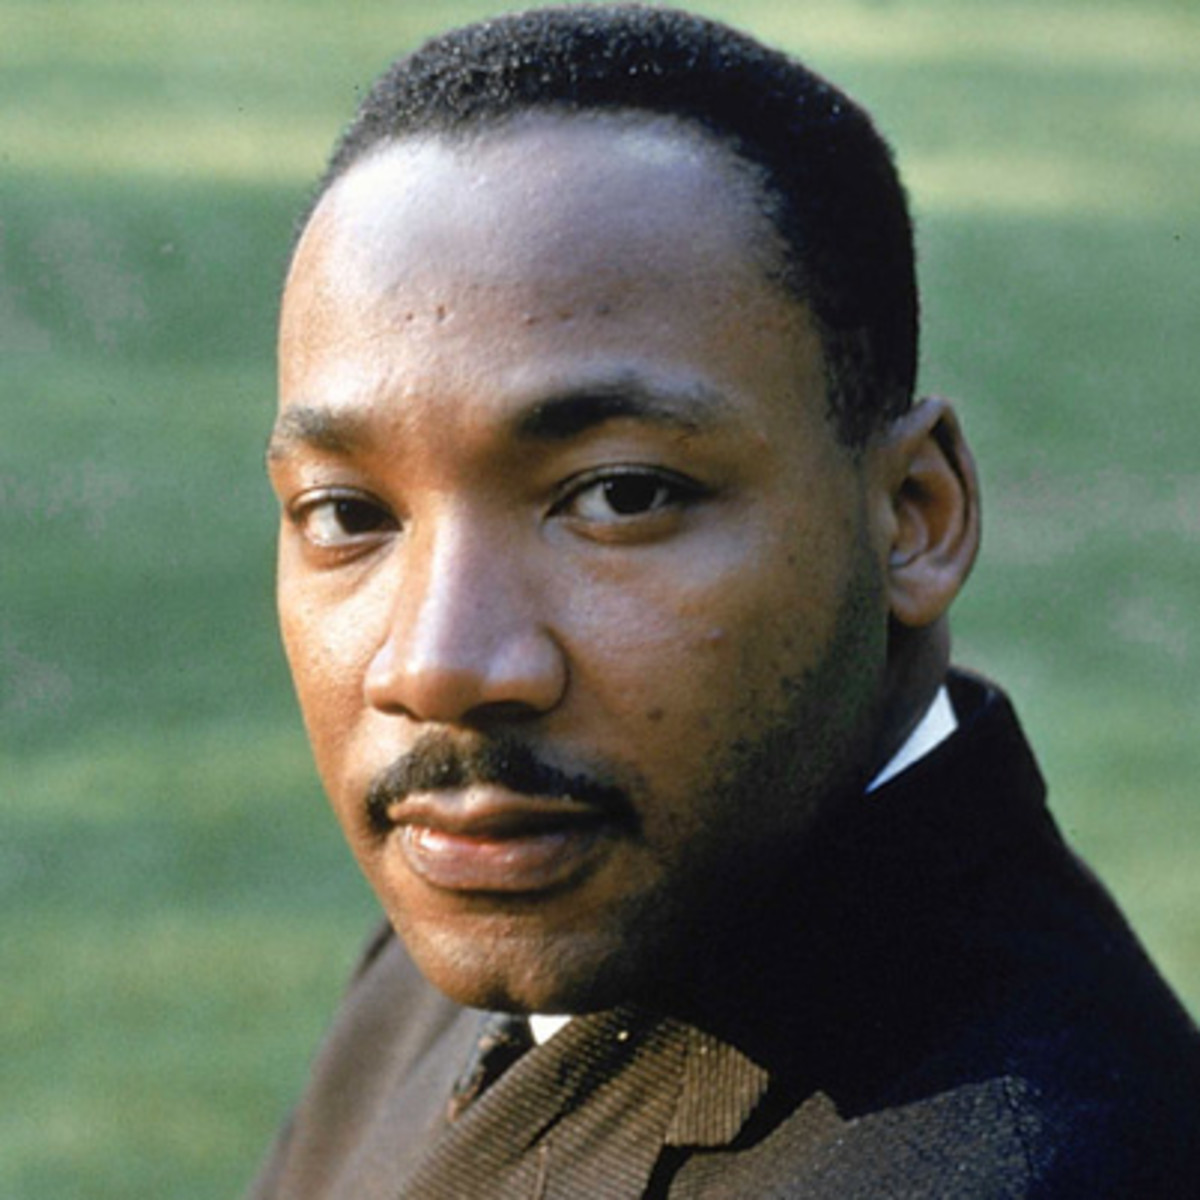 Our most important civil rights leader on April 4, 1968.